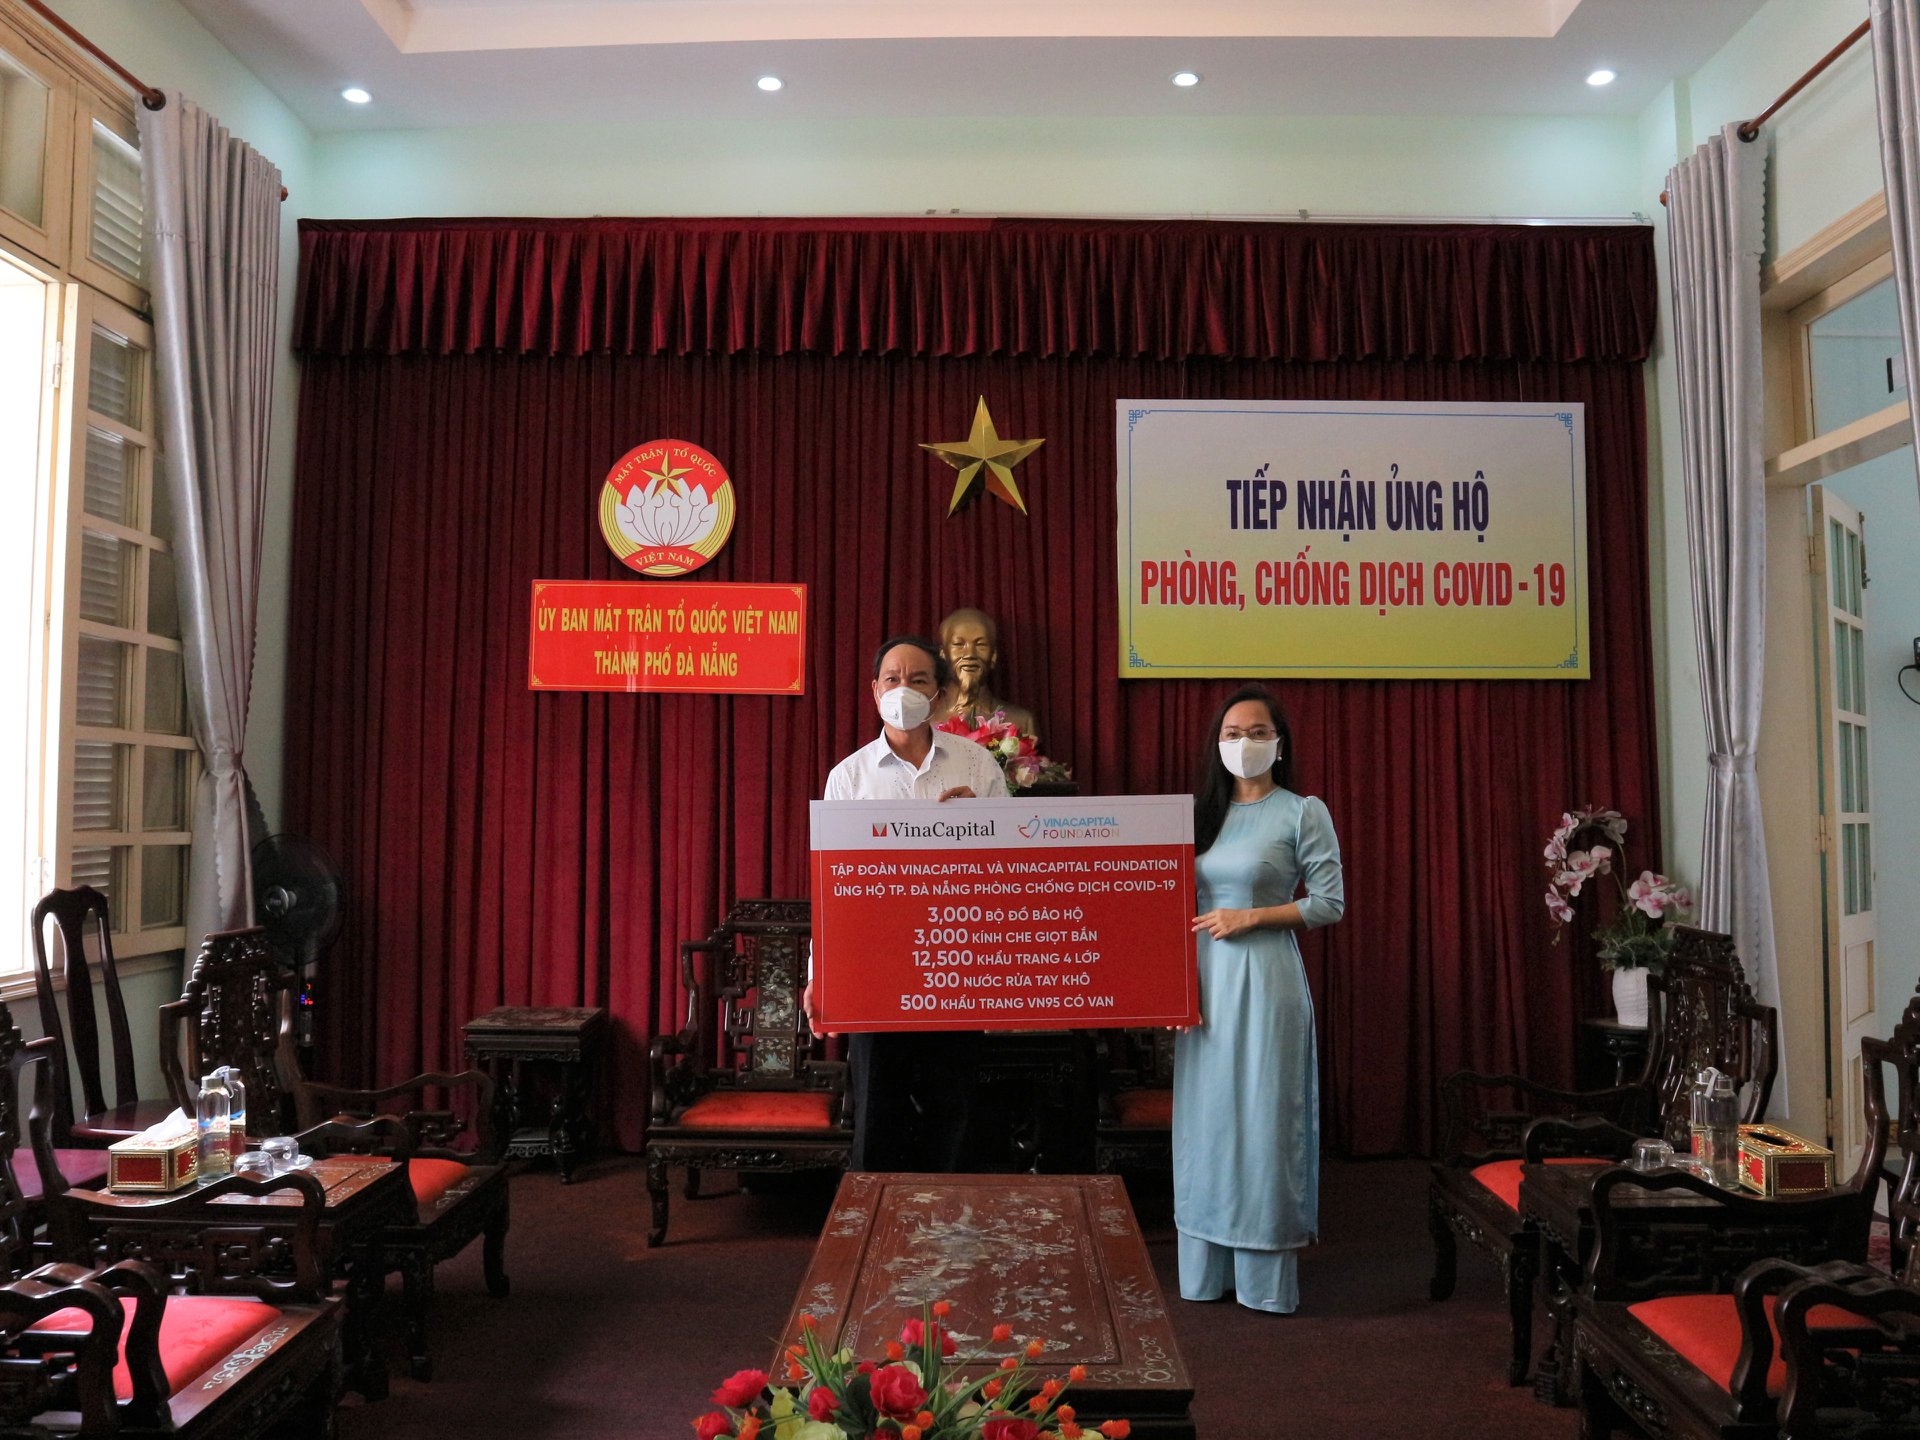 Da Nang received support to cope with COVID 19